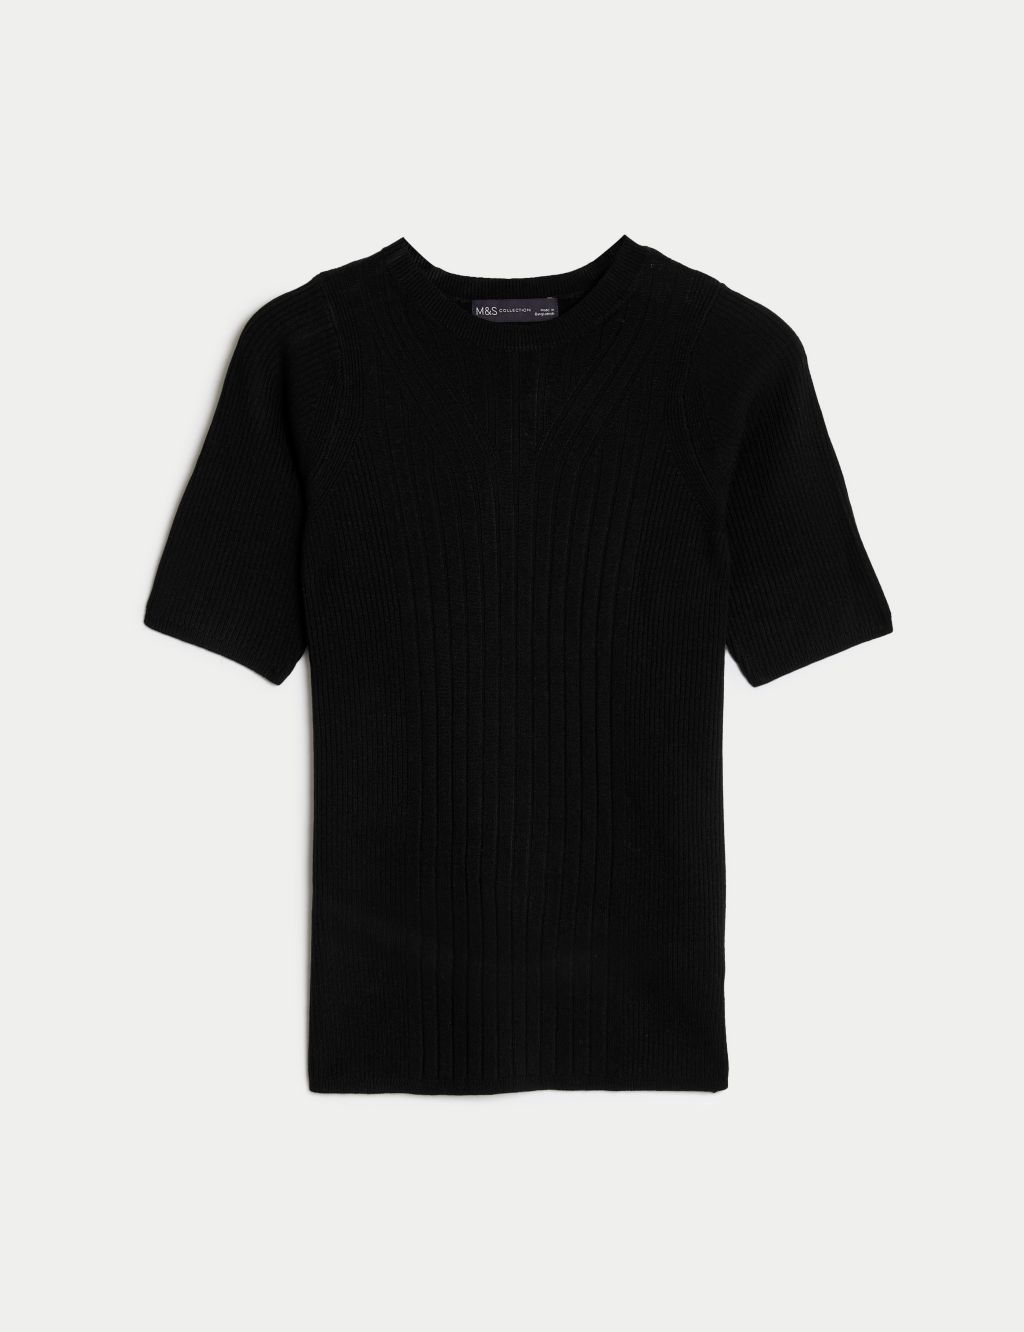 Ribbed Crew Neck Knitted Top image 2